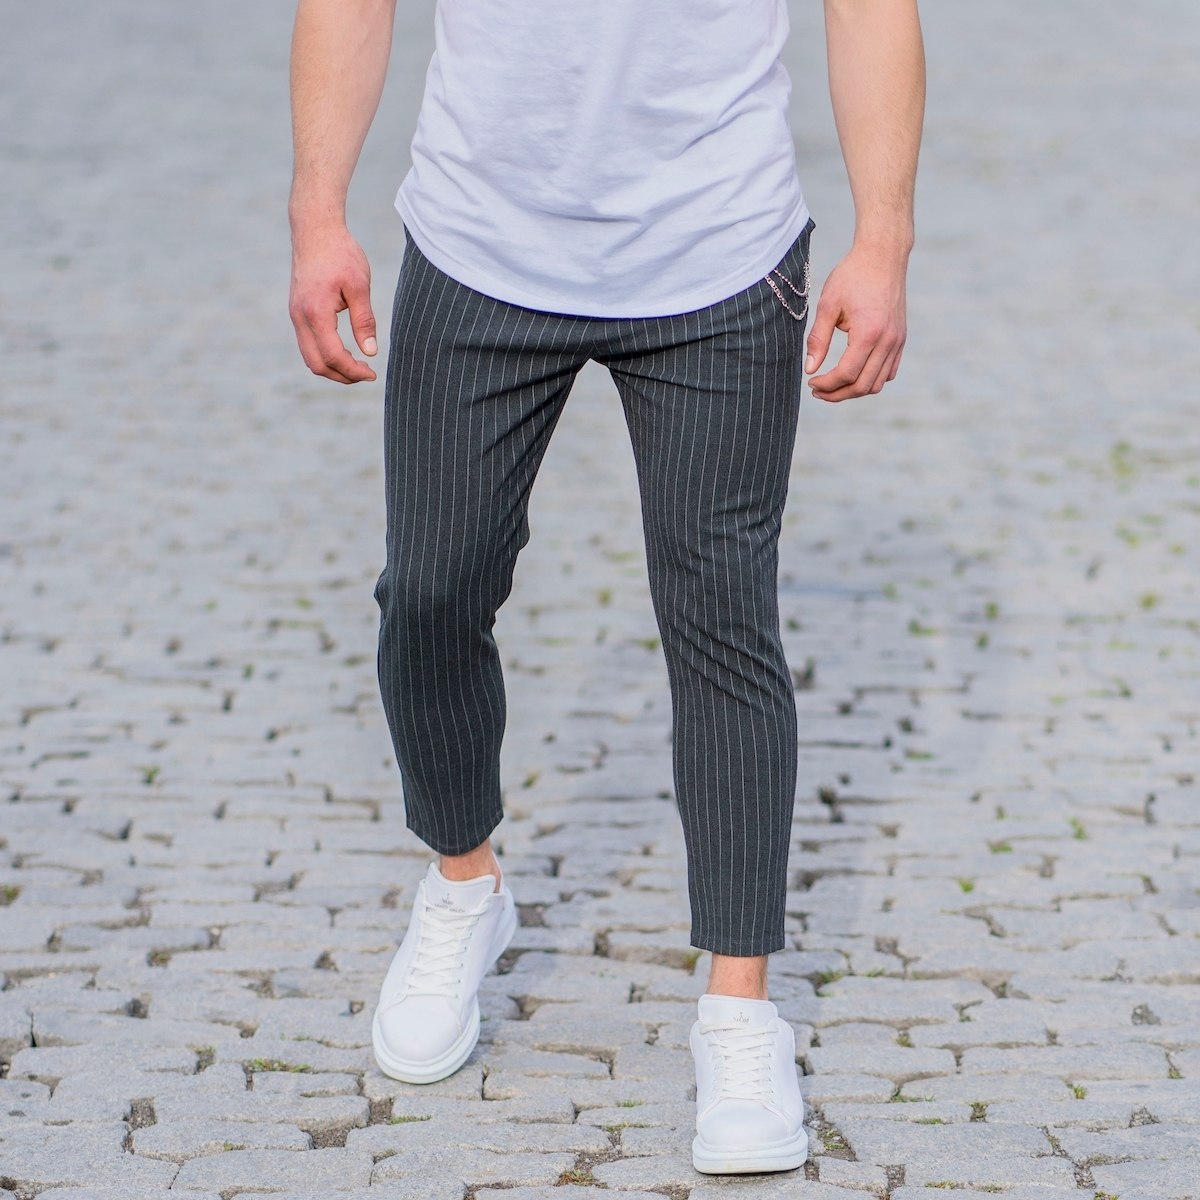 Gray Trousers With White Stripes and Chain